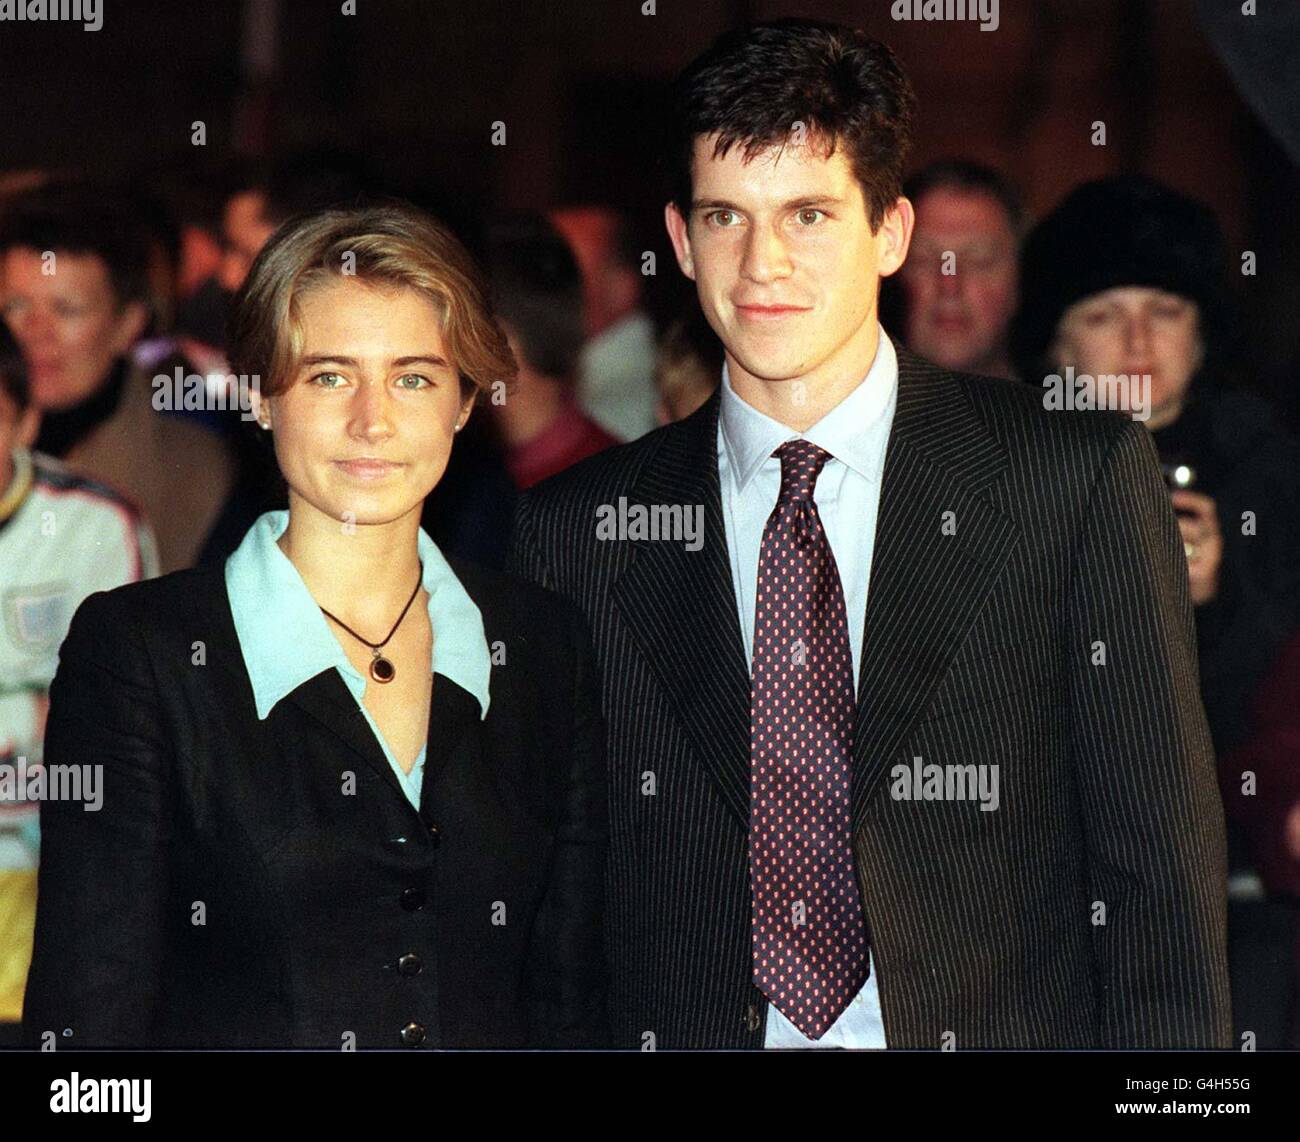 Tennis ace Tim Henman and his girlfriend Lucy Heald, arriving at London's QEII Conference Centre, for the BBC Sports Personality of the Year 1998 Awards. 21/7/99: Henman reported to have asked Heald to marry him. * 09/04/2002: The tennis star and his wife are expecting their first child, he announced today. The 28-year-old British number one, who has lost out in three Wimbledon semi-finals, said the baby was expected in October. Stock Photo